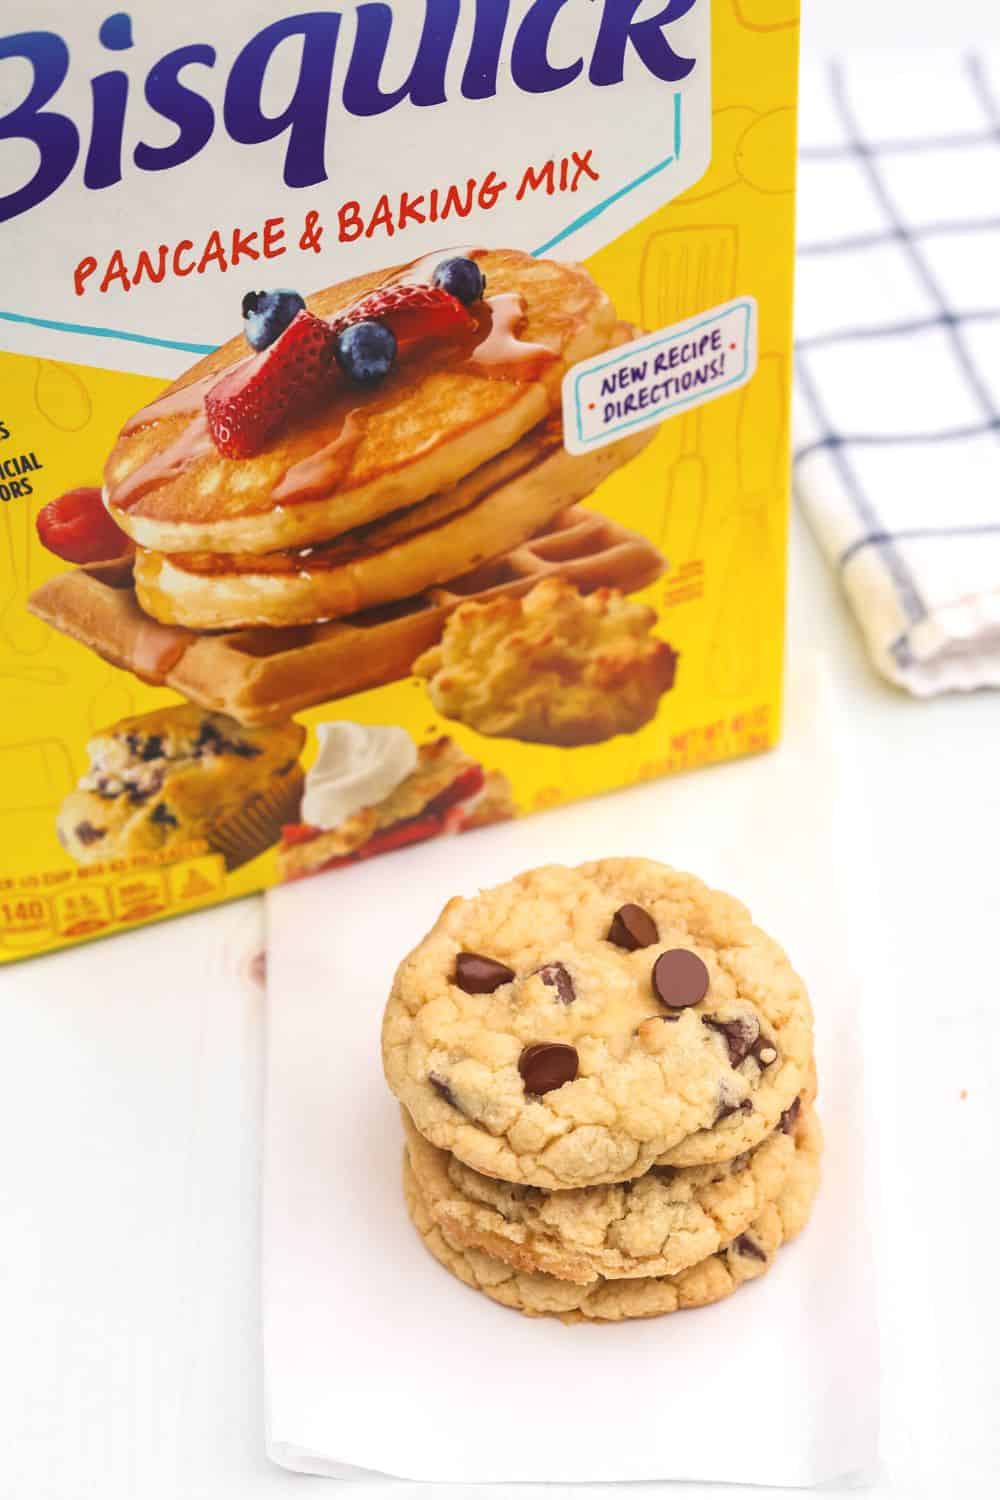 three chocolate chip cookies are stacked in front of a box of Betty Crocker Bisquick baking mix